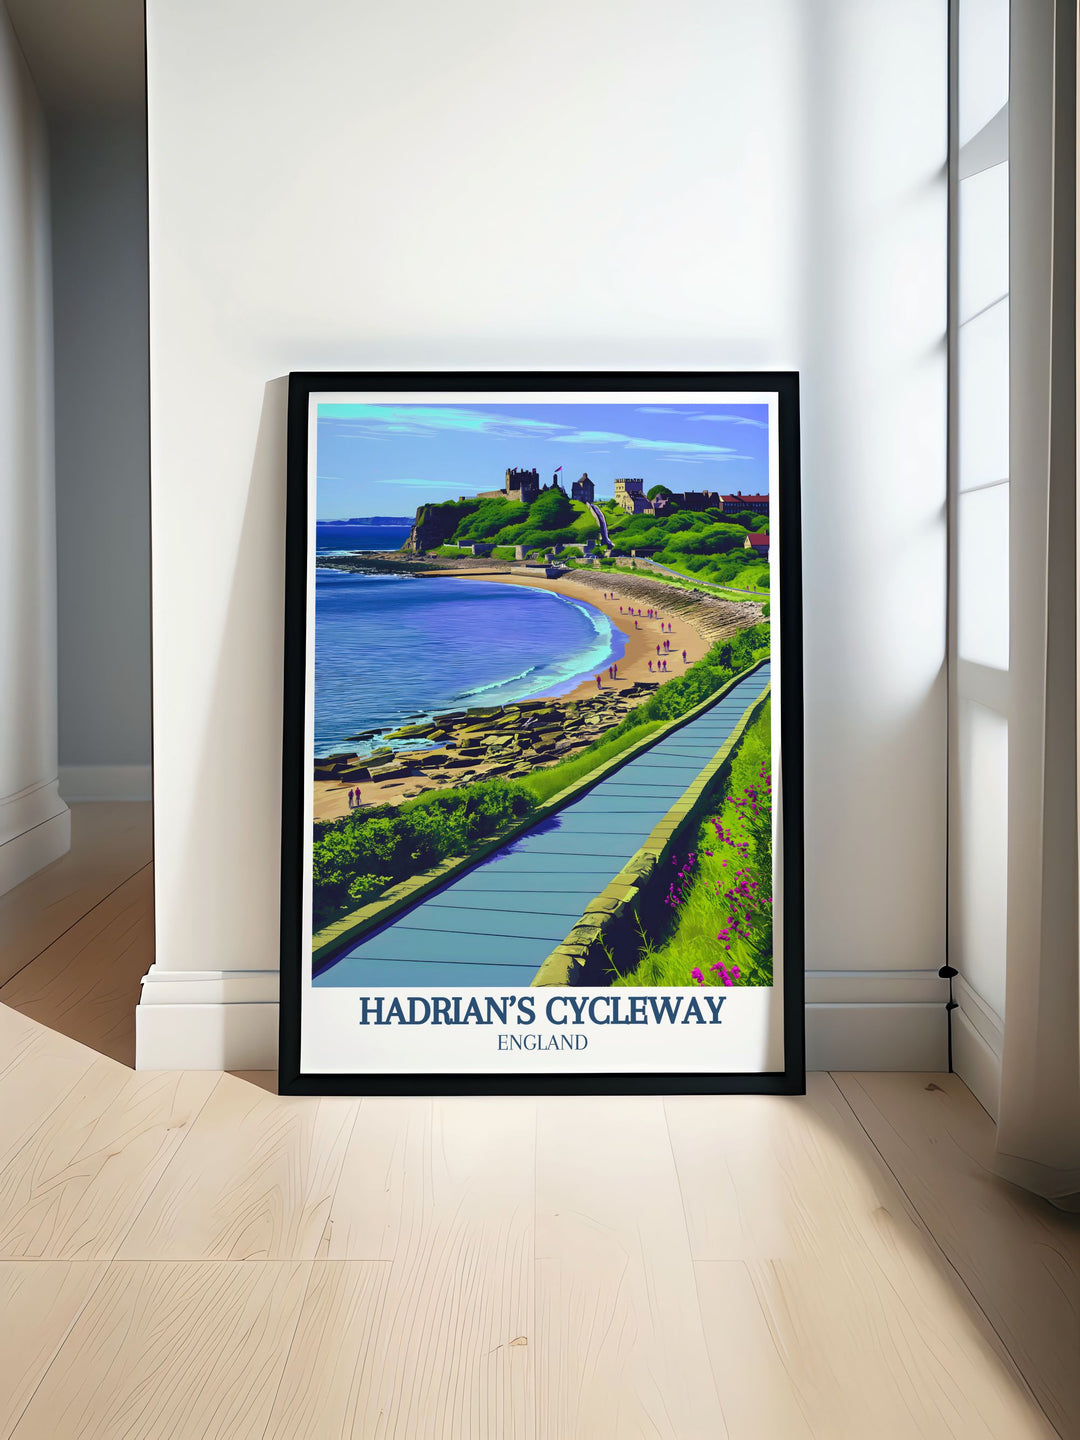 Highlighting Tynemouth Castles architectural brilliance, this art print offers a glimpse into Englands medieval history, perfect for history buffs and art lovers.